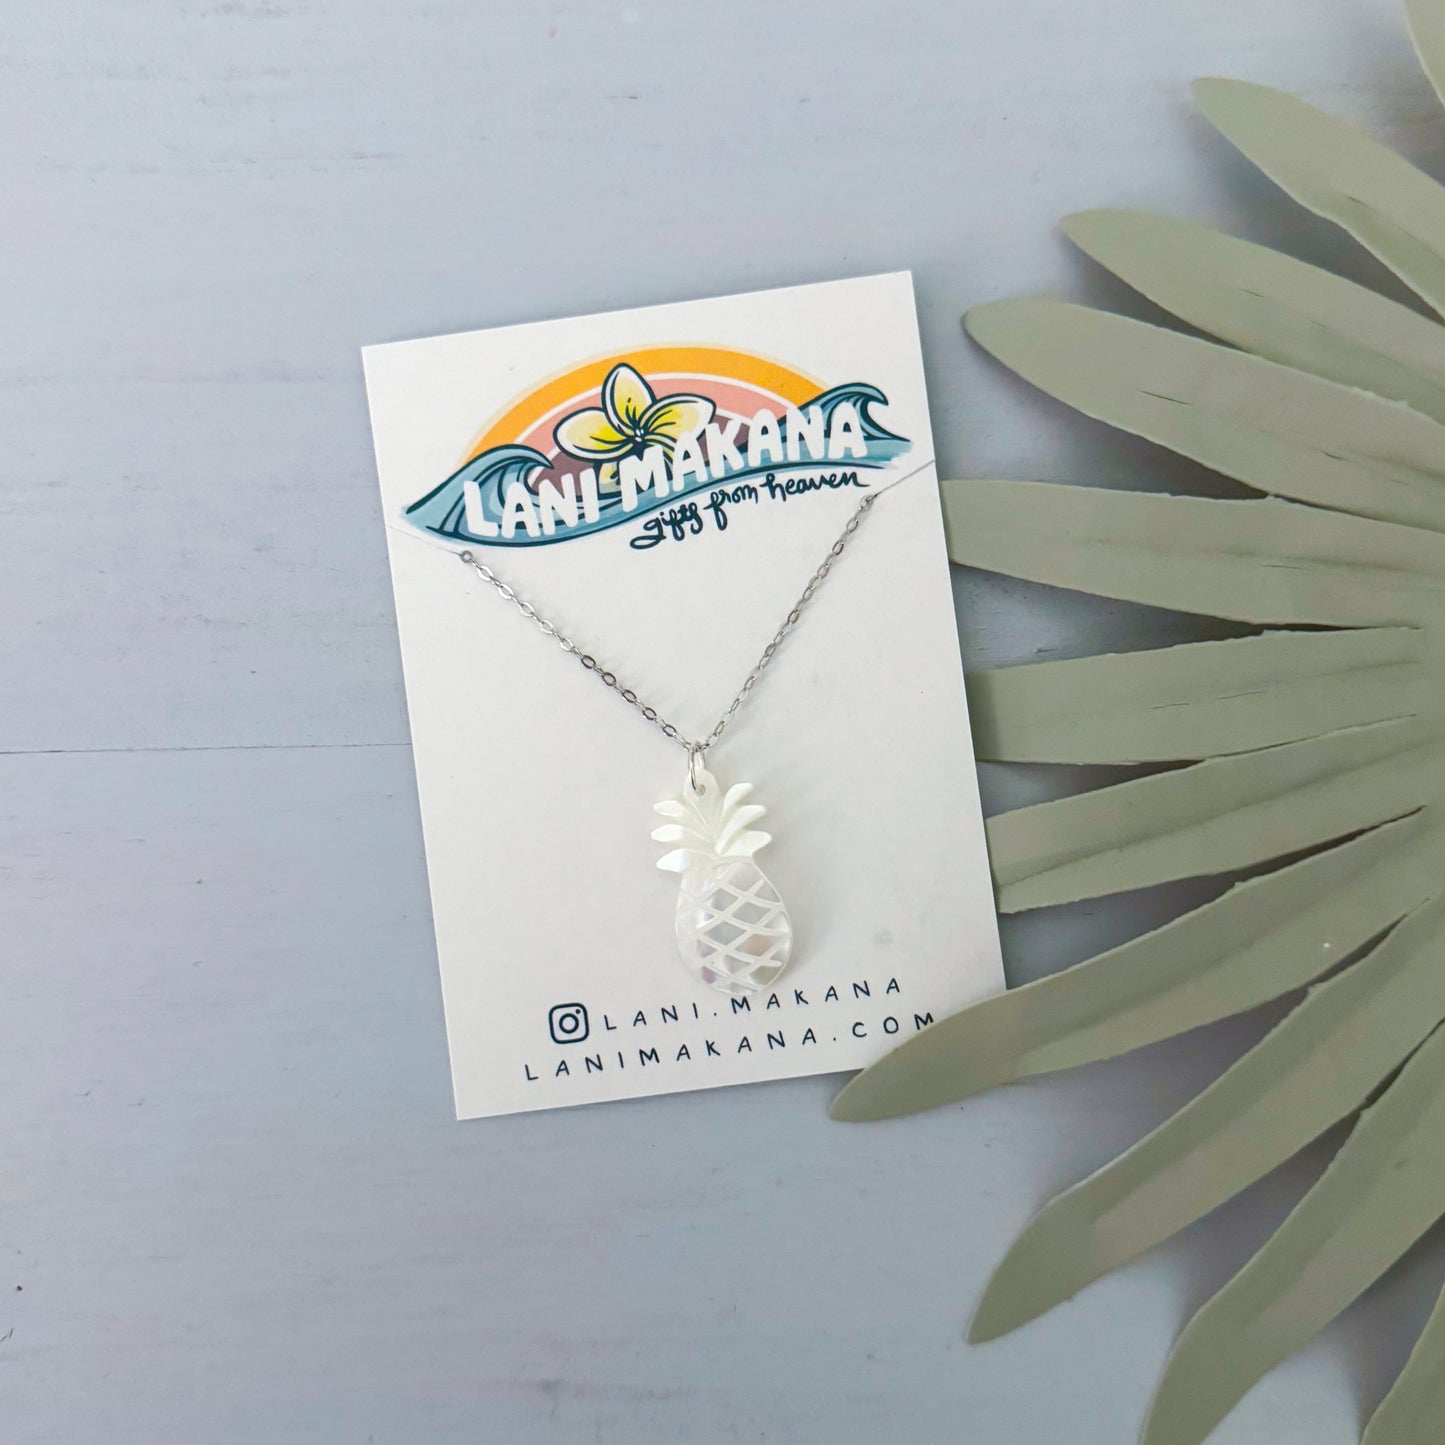 Mother of Pearl Pineapple Necklace